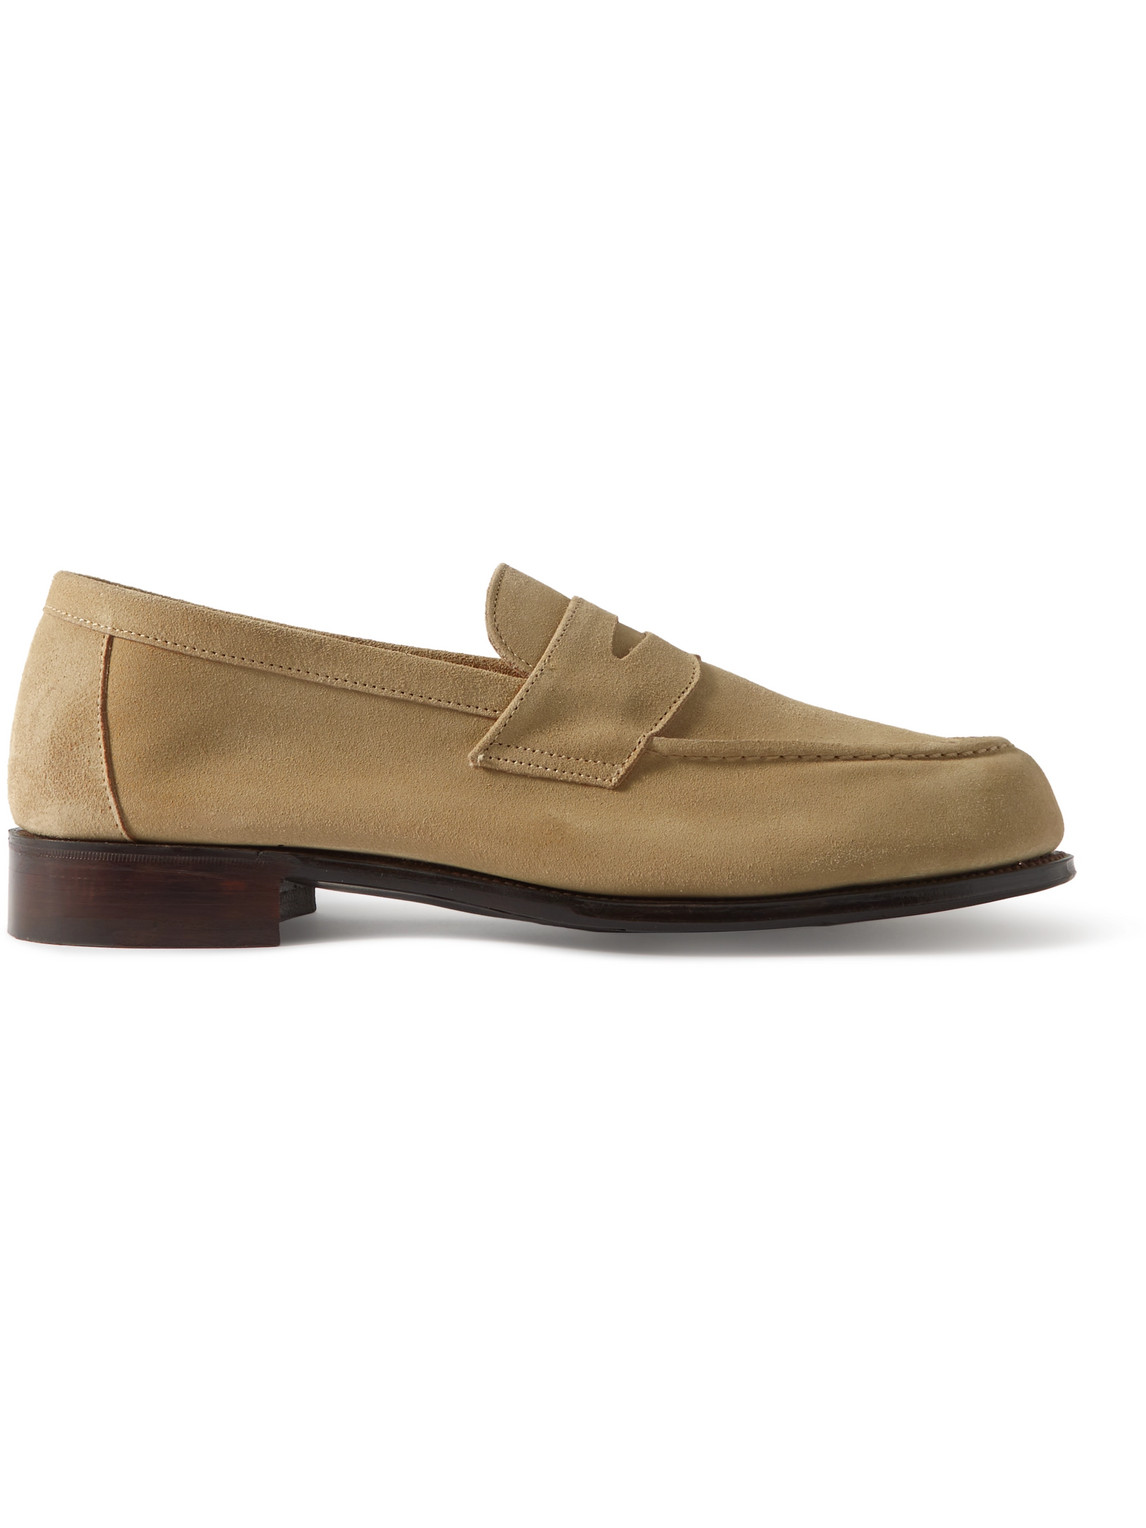 Cannes Suede Penny Loafers